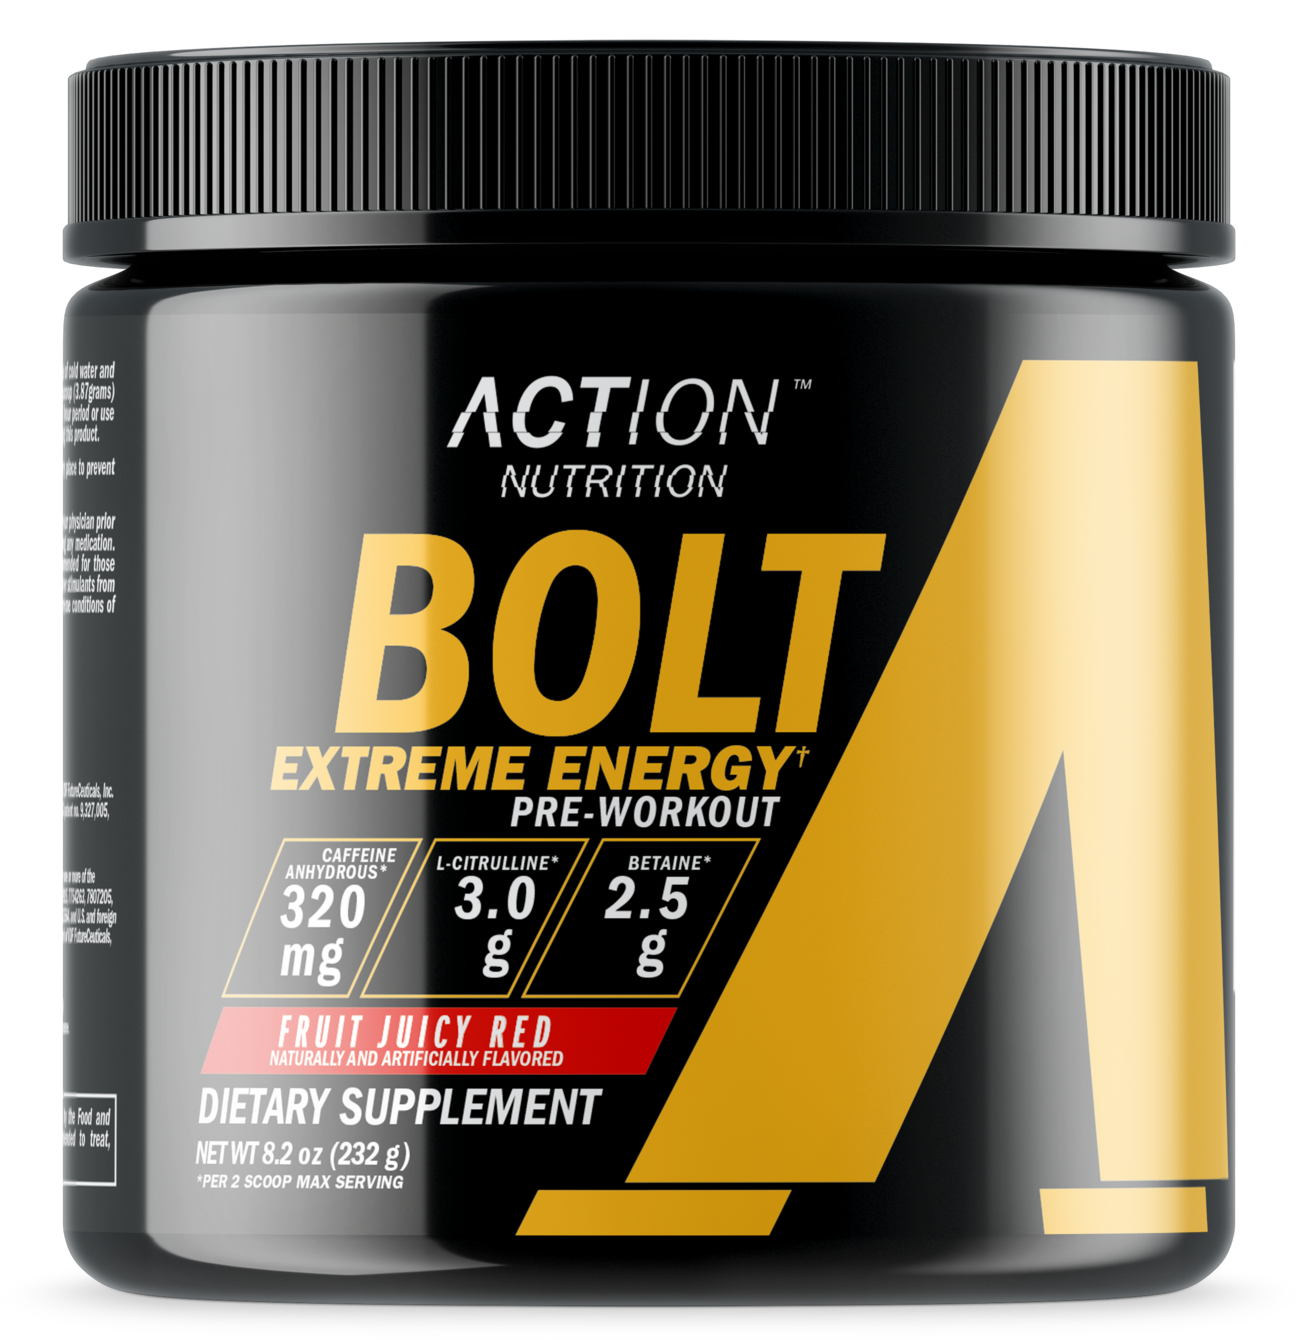 Action Nutrition BOLT Extreme Energy